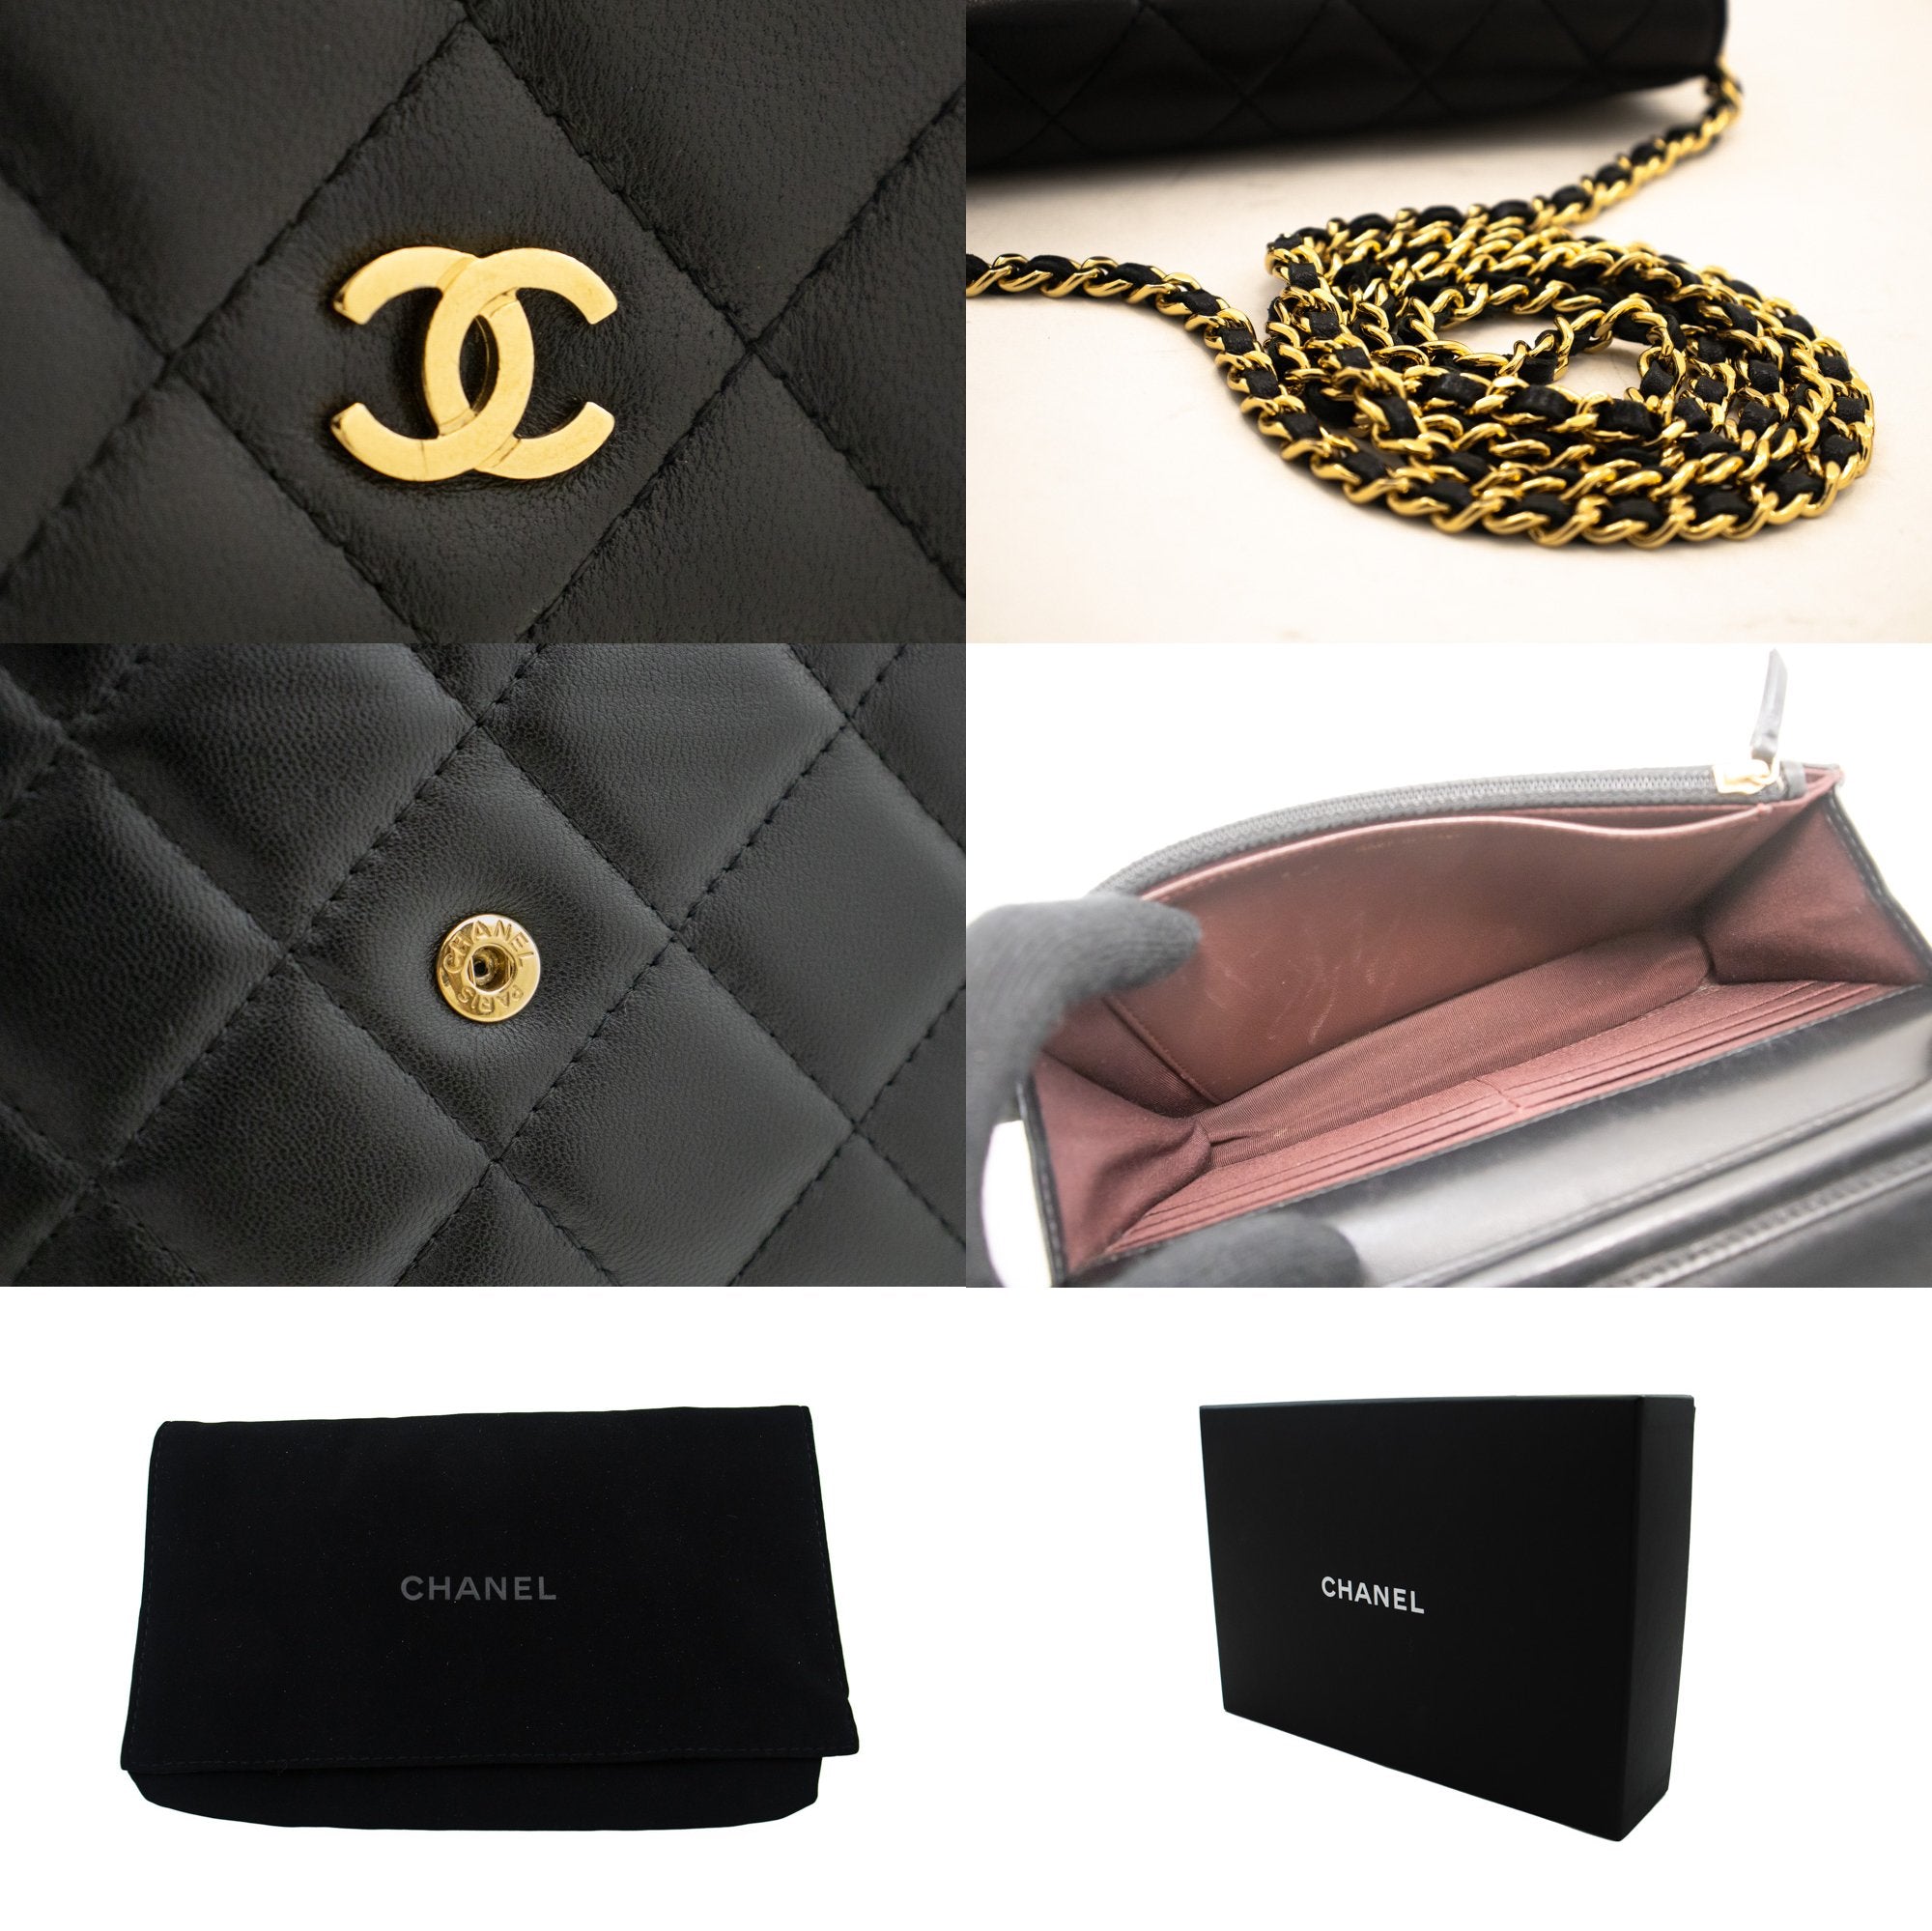 chanel wallet with a chain